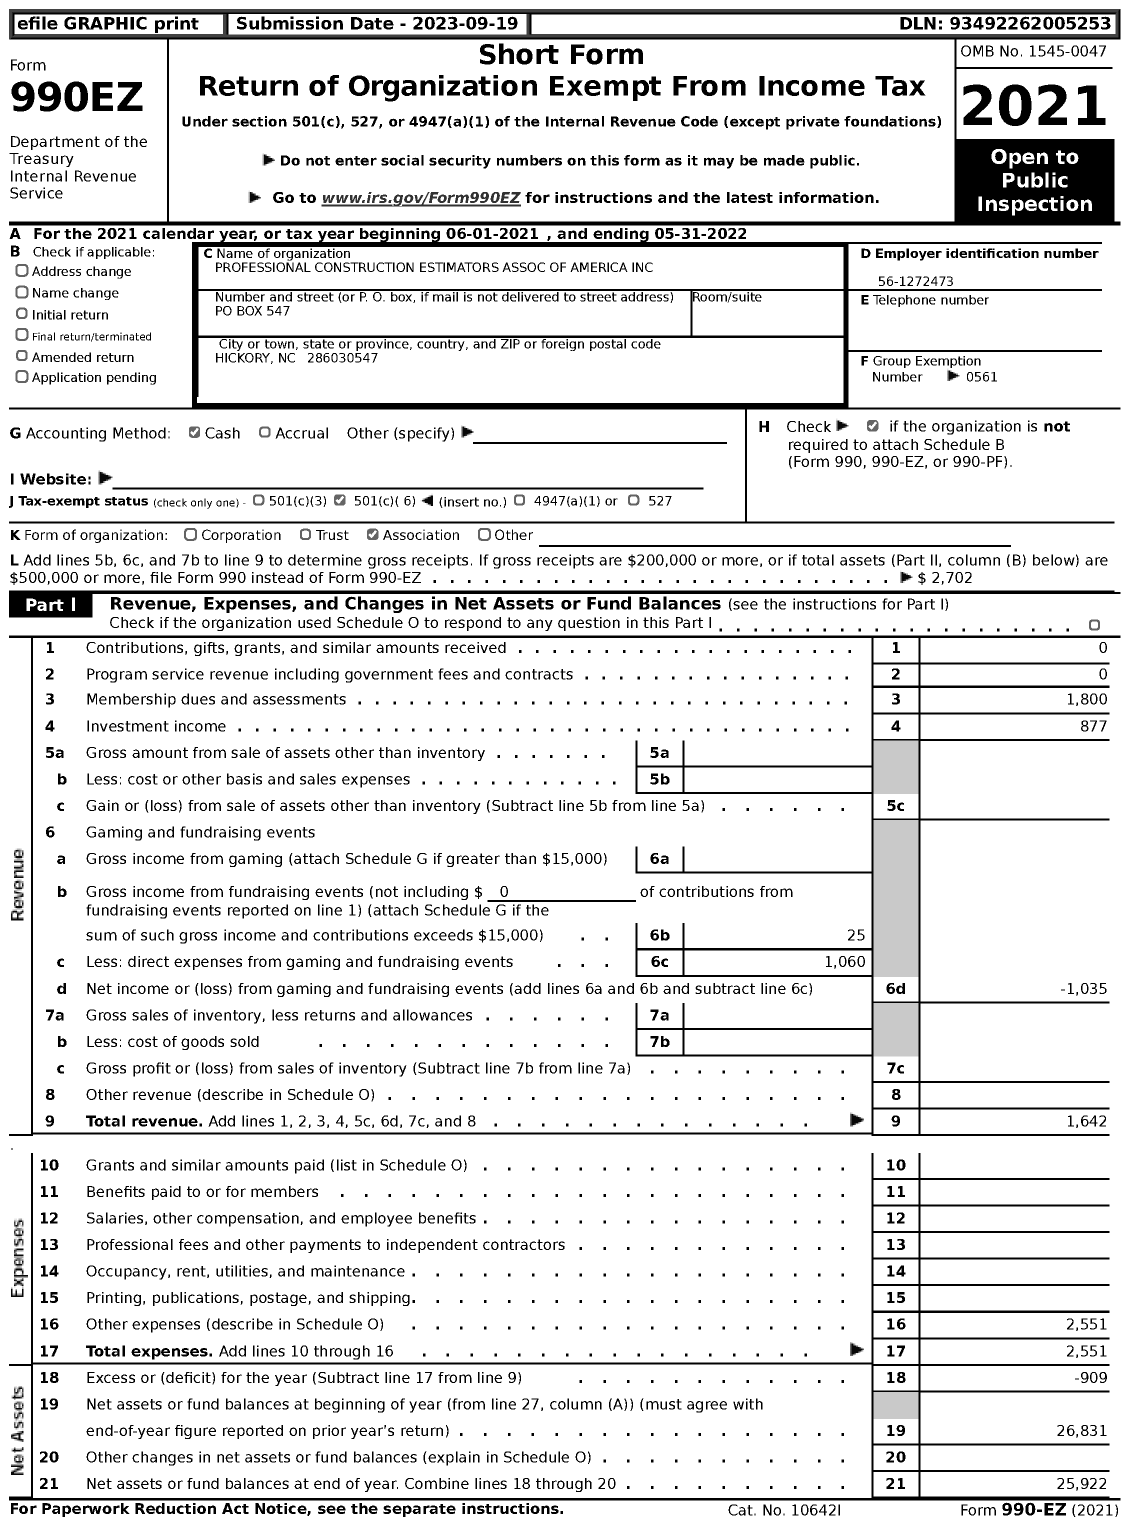 Image of first page of 2021 Form 990EZ for Professional Construction Estimators Association of America / Catawba Valley Chapter